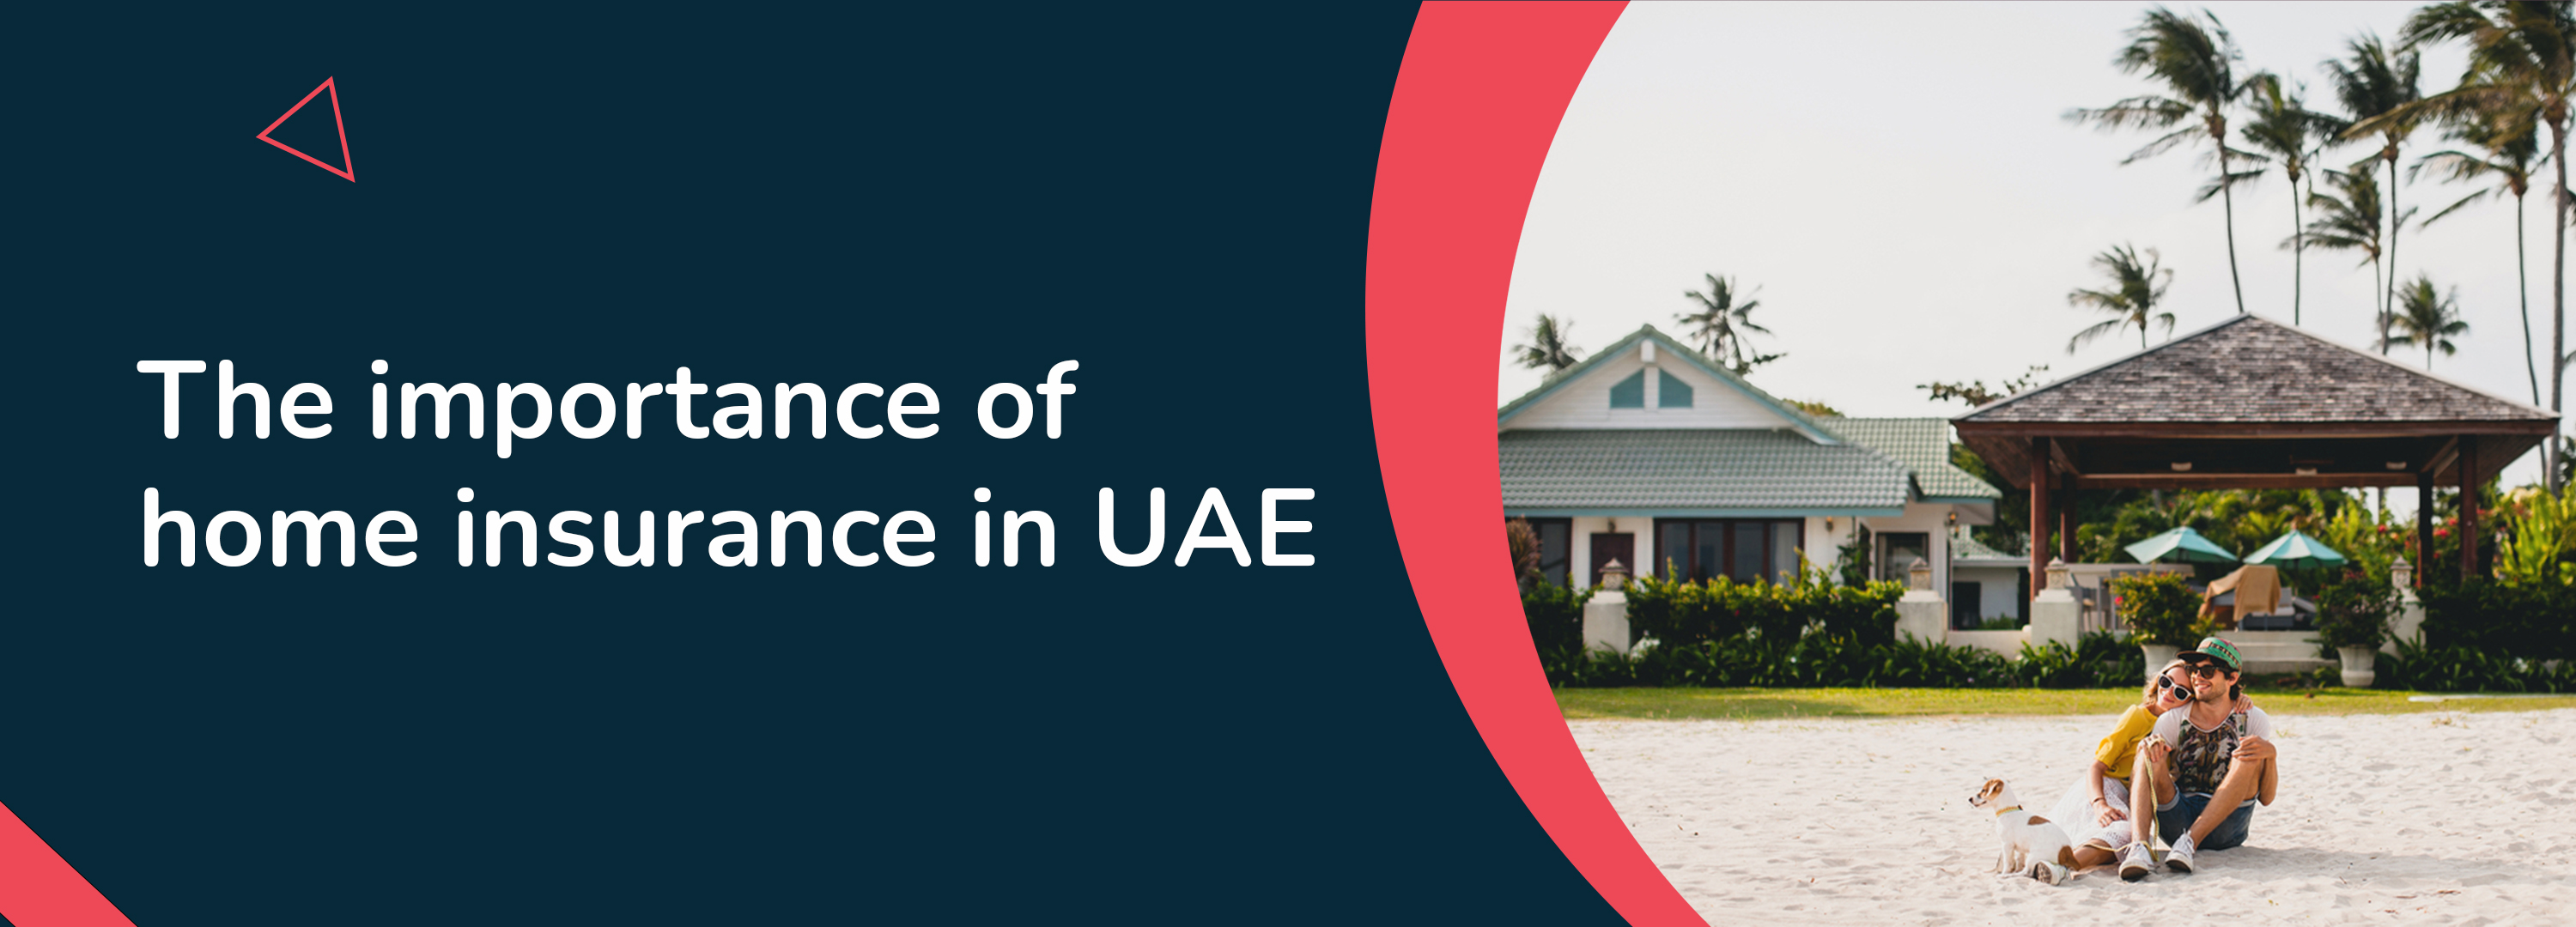 The importance of home insurance in UAE